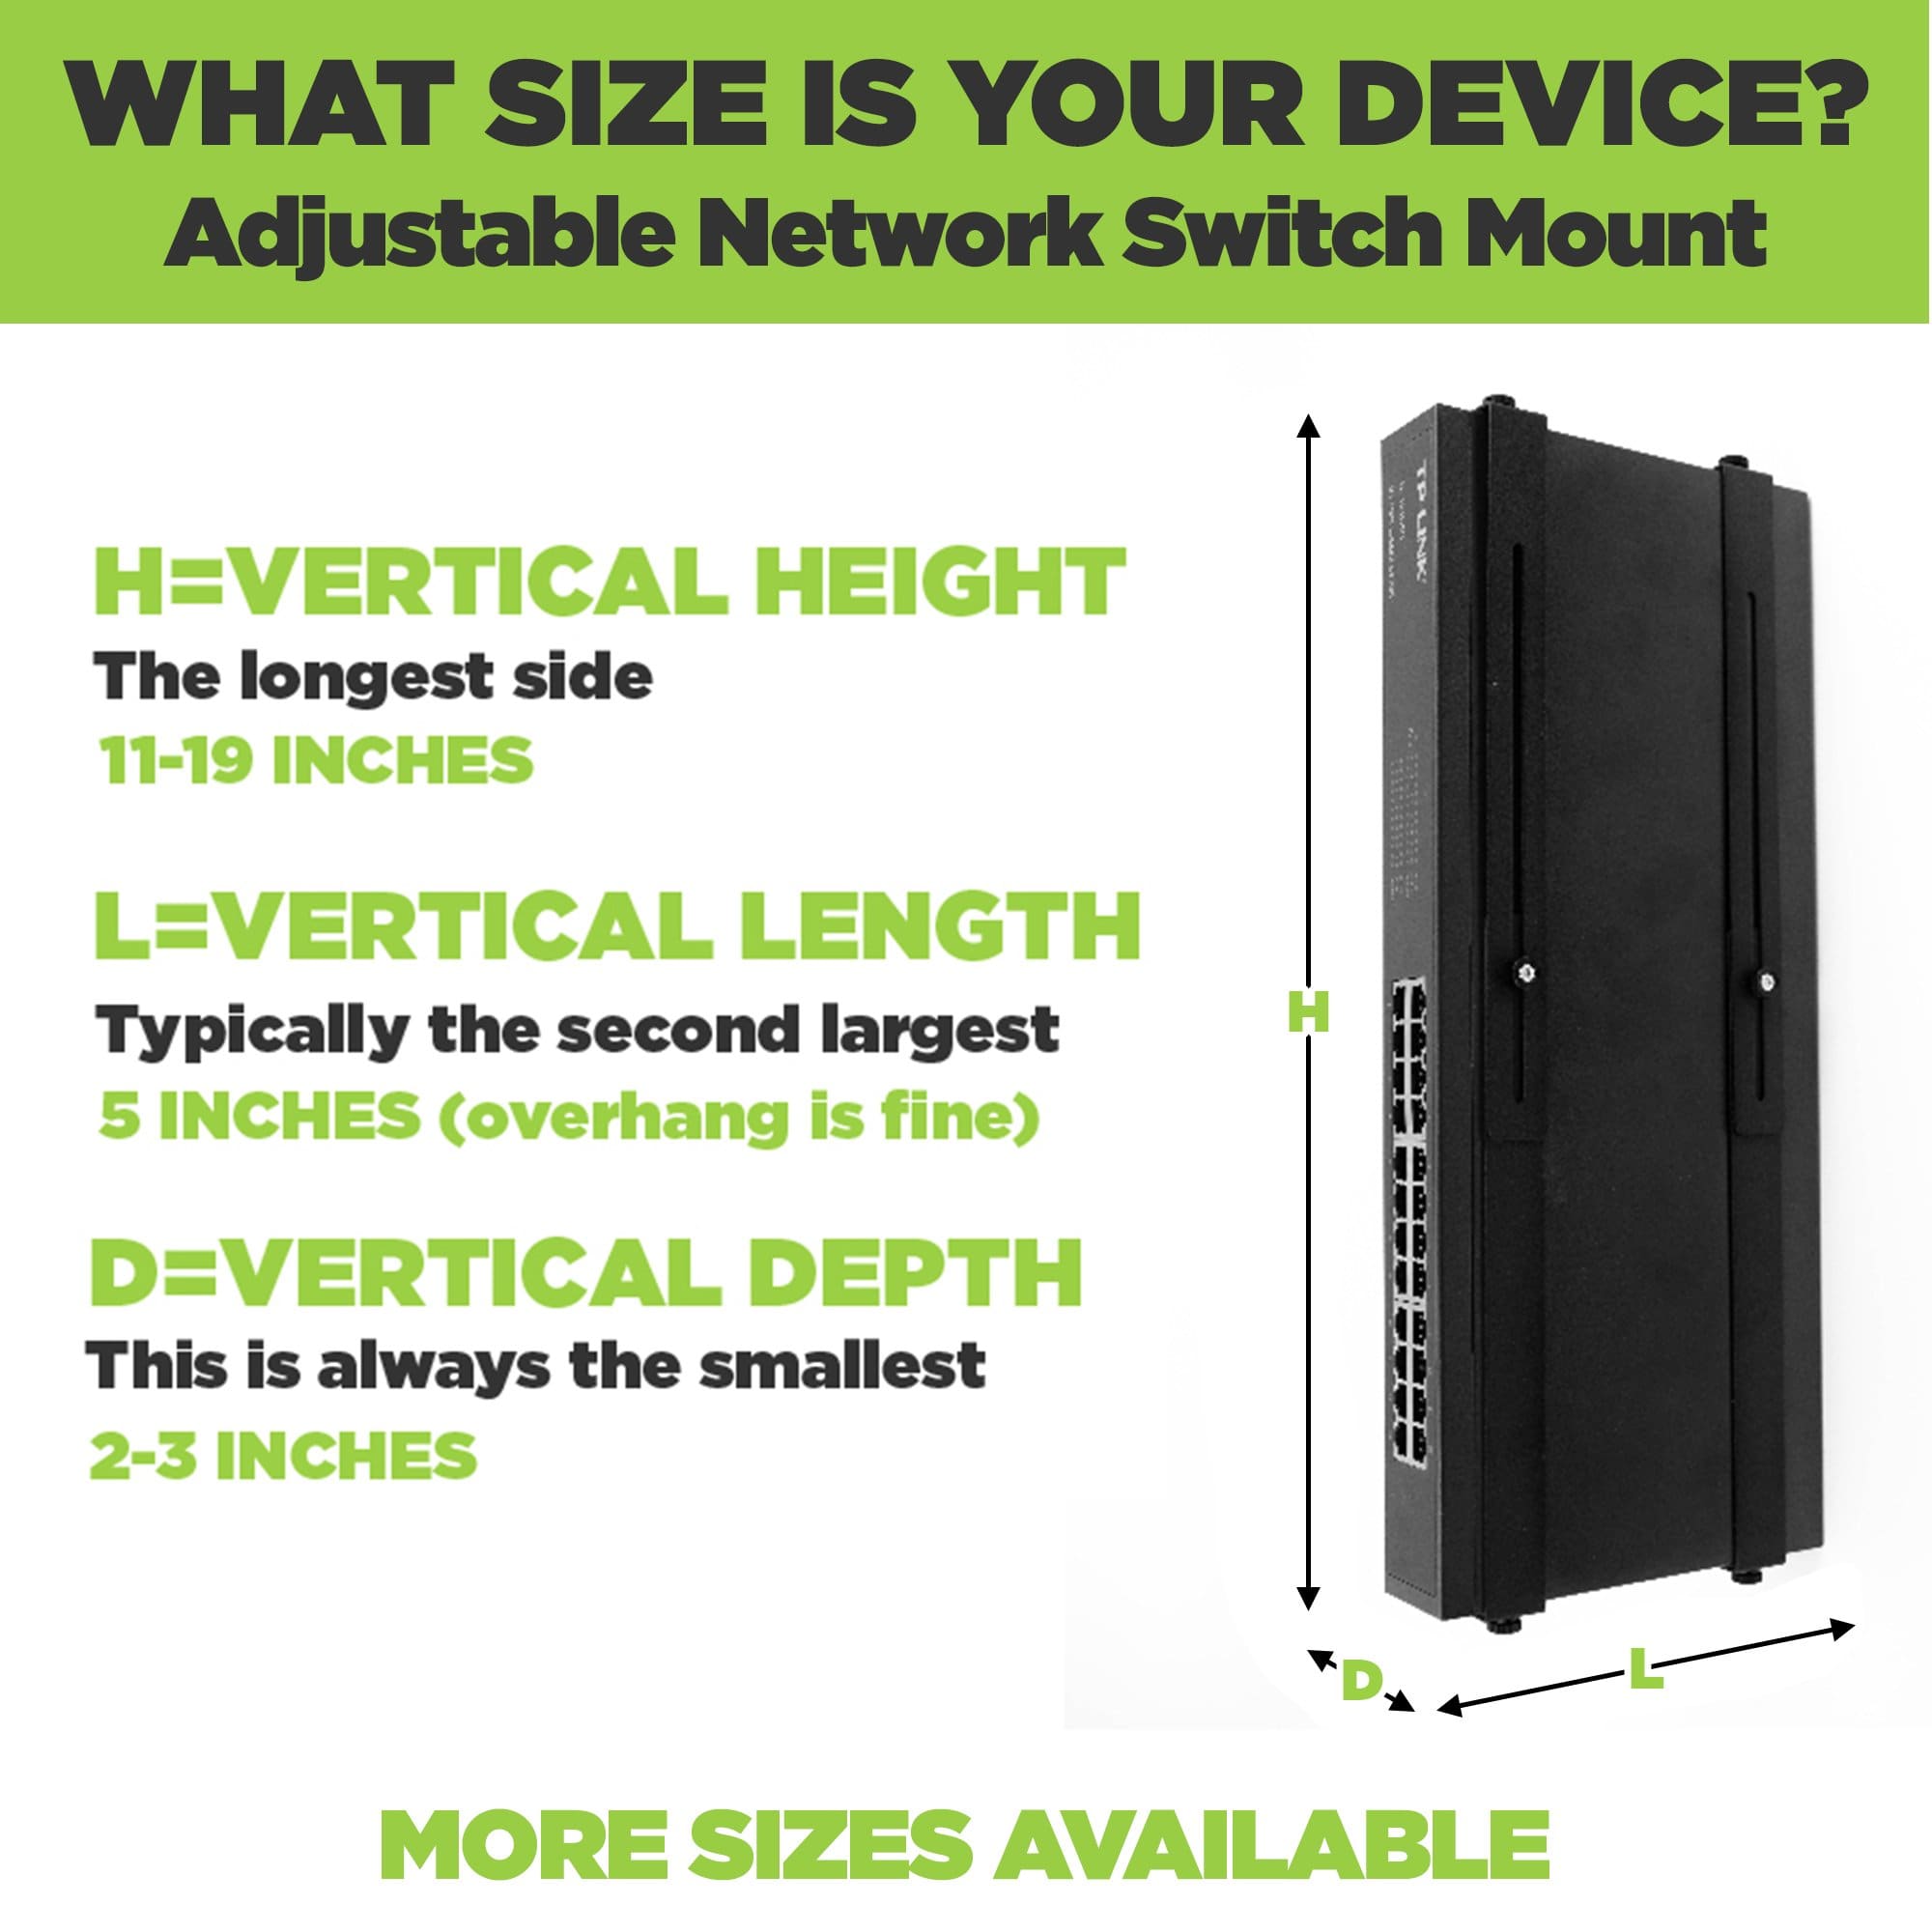 Adjustable Network Switch Mount adjusts to fit a wide range of network devices.